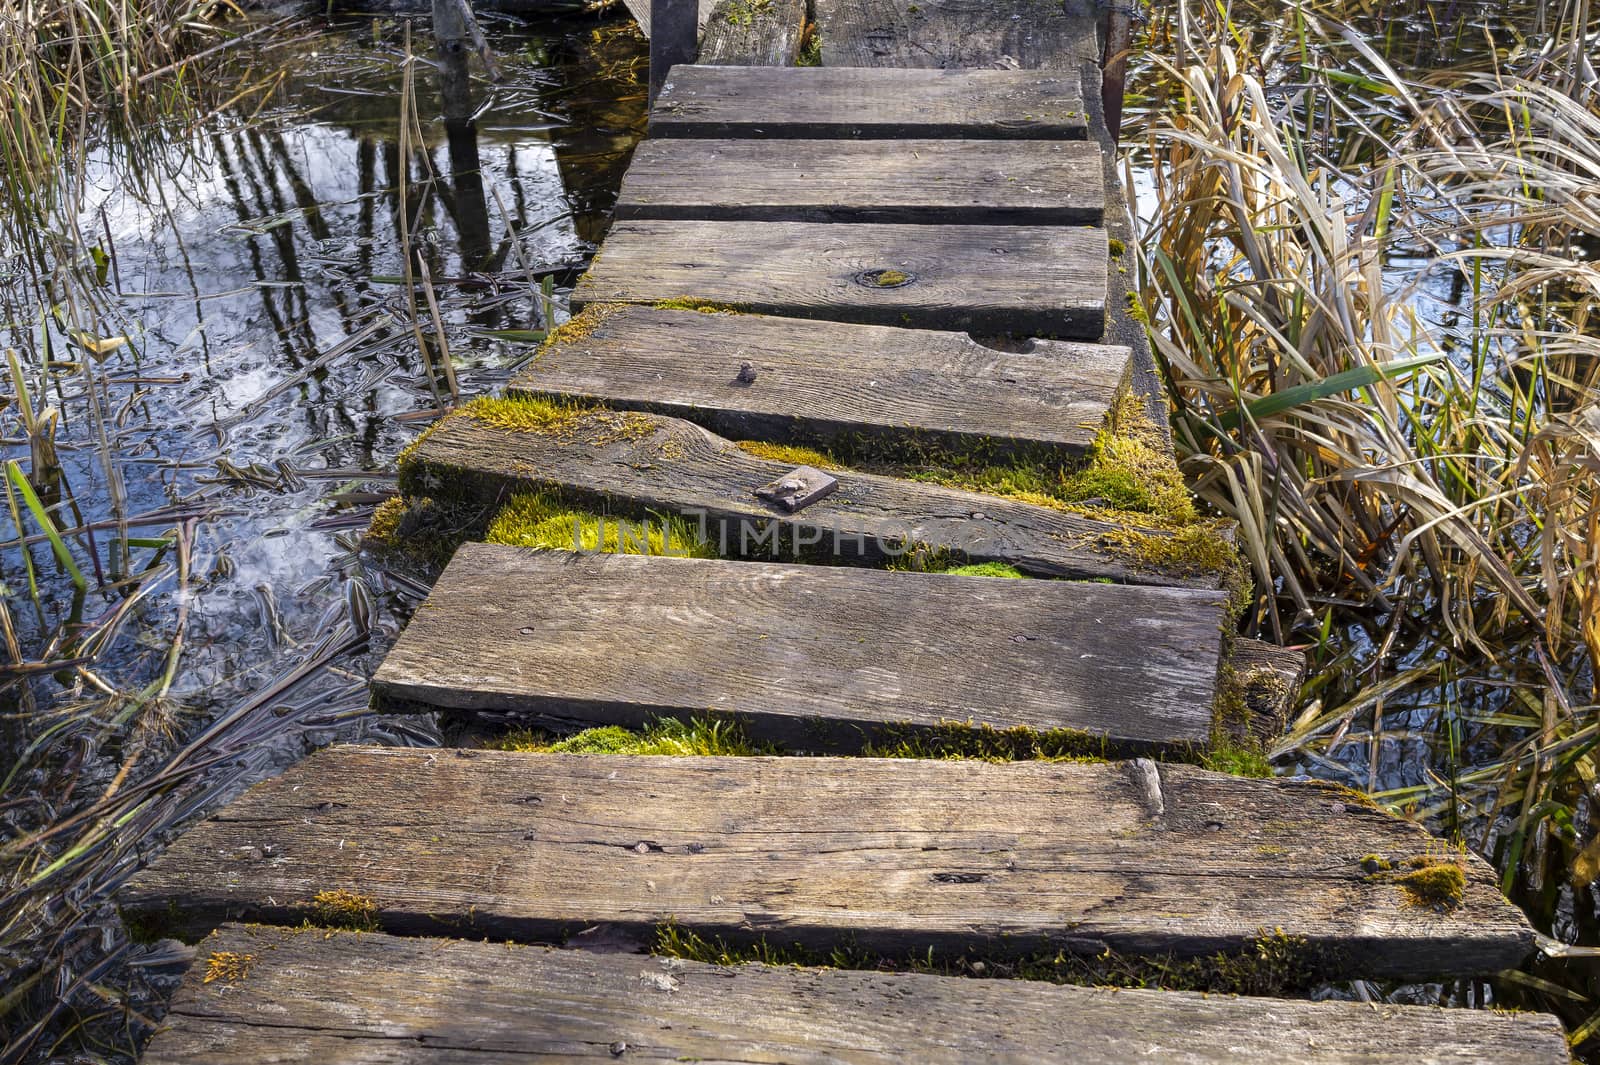 Old rickety rustic wooden jetty on a lake with moss growing between the planks and surrounded by reeds in the water in a close up view